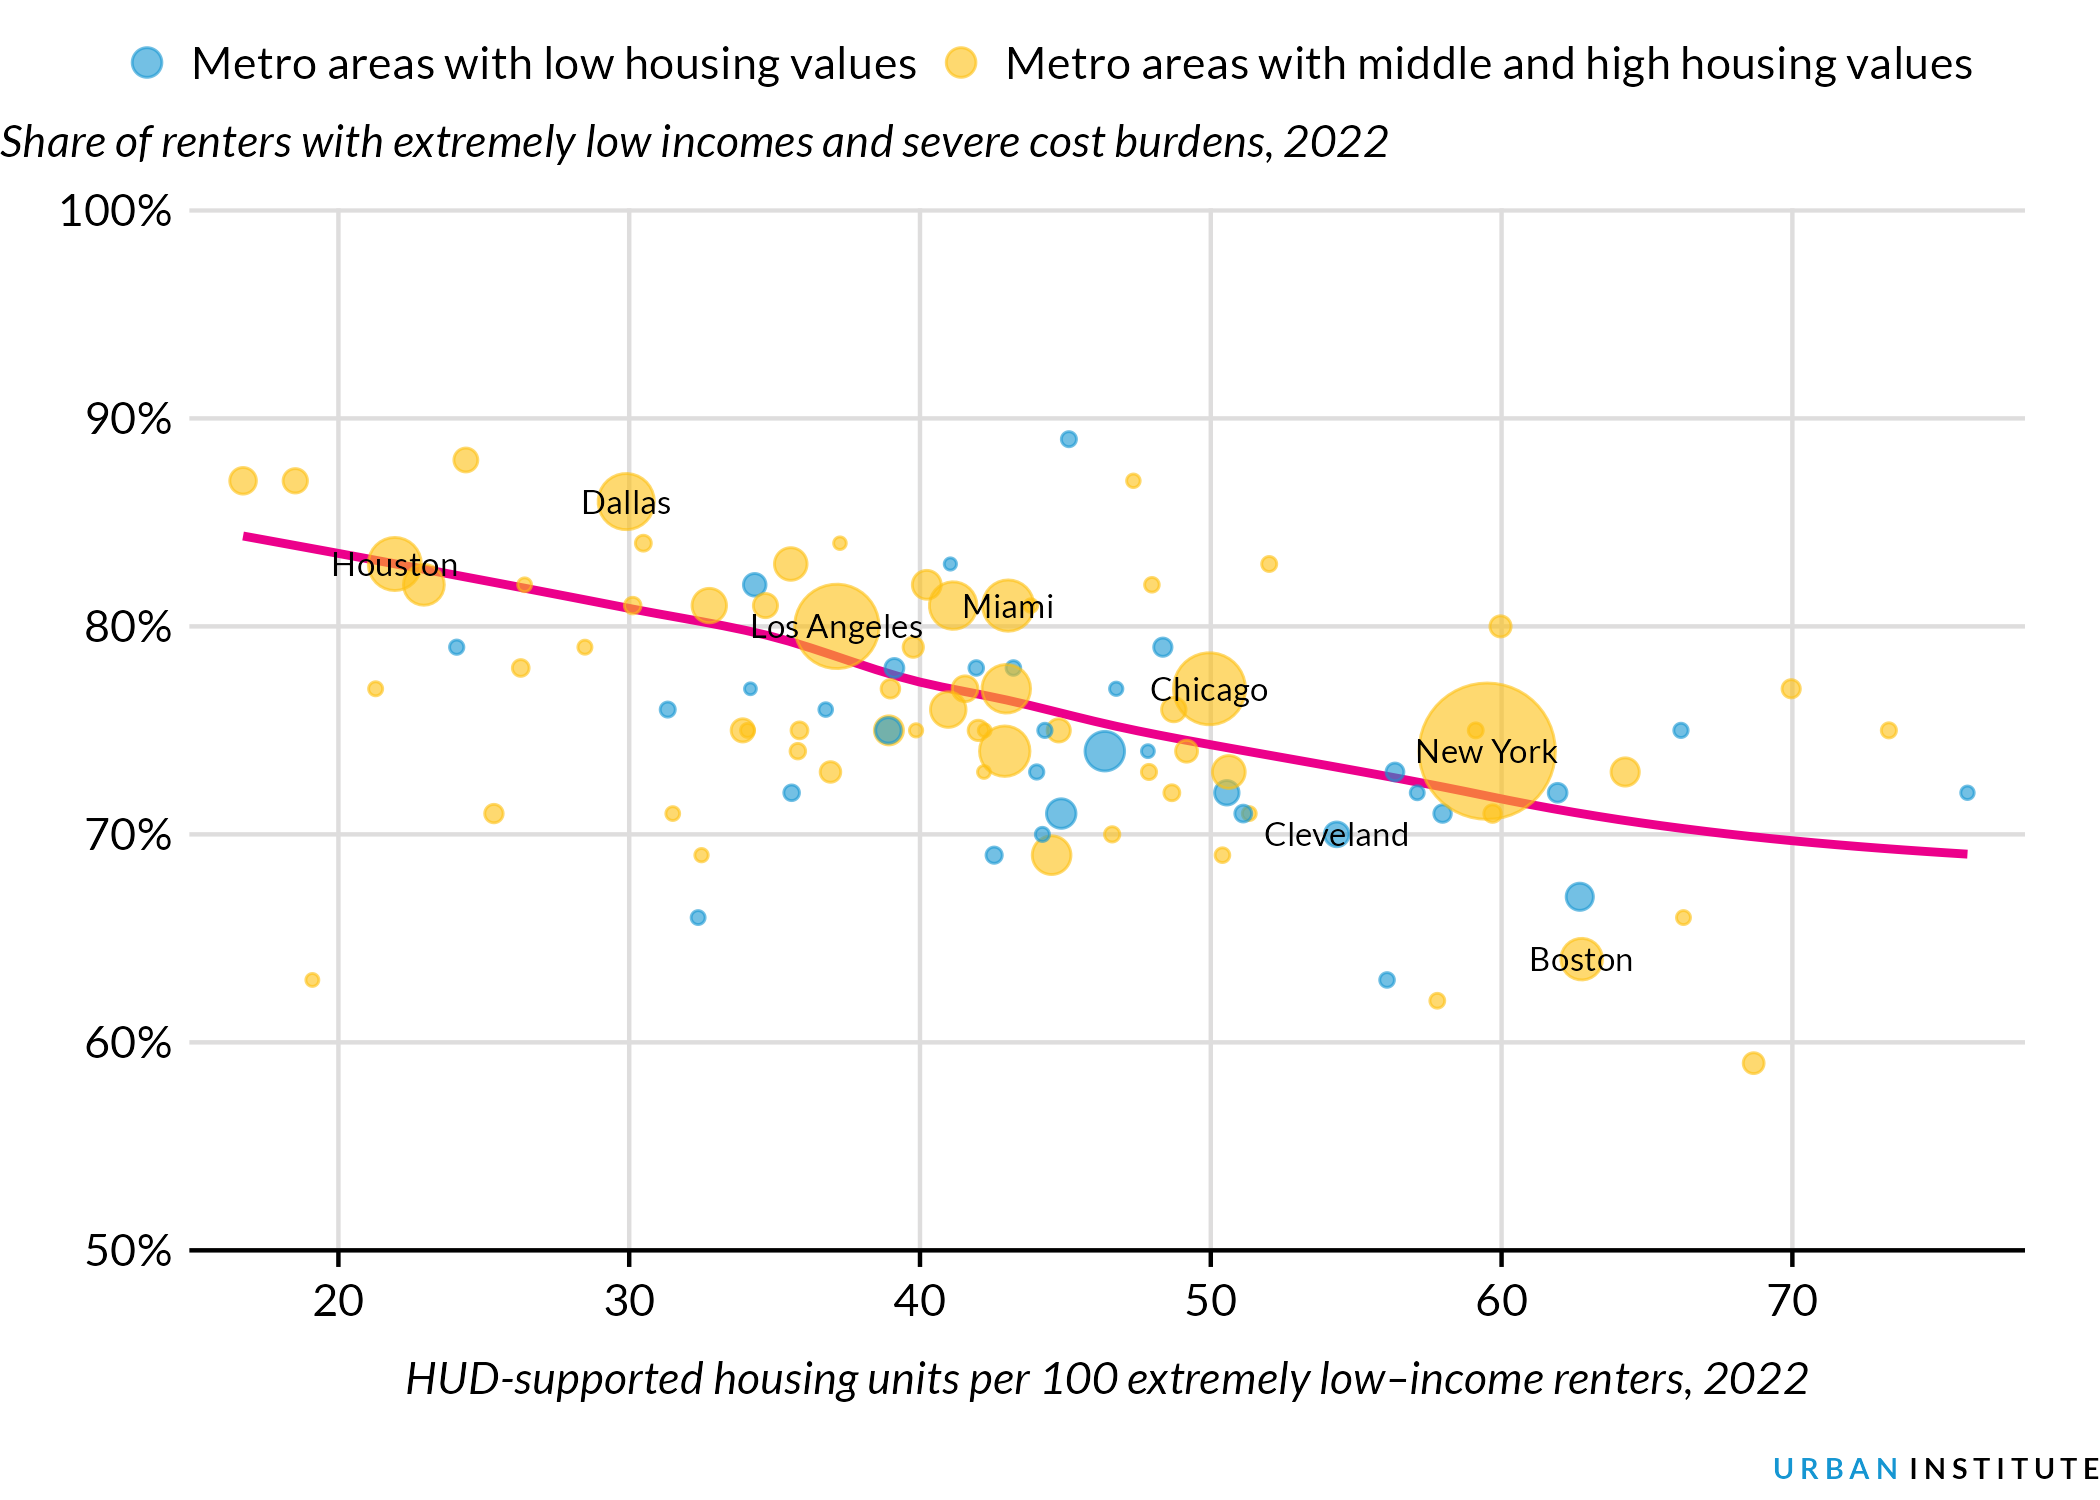 A scatterplot showing that public subsidies help ensure housing affordability for families with extremely low incomes in US metropolitan areas.